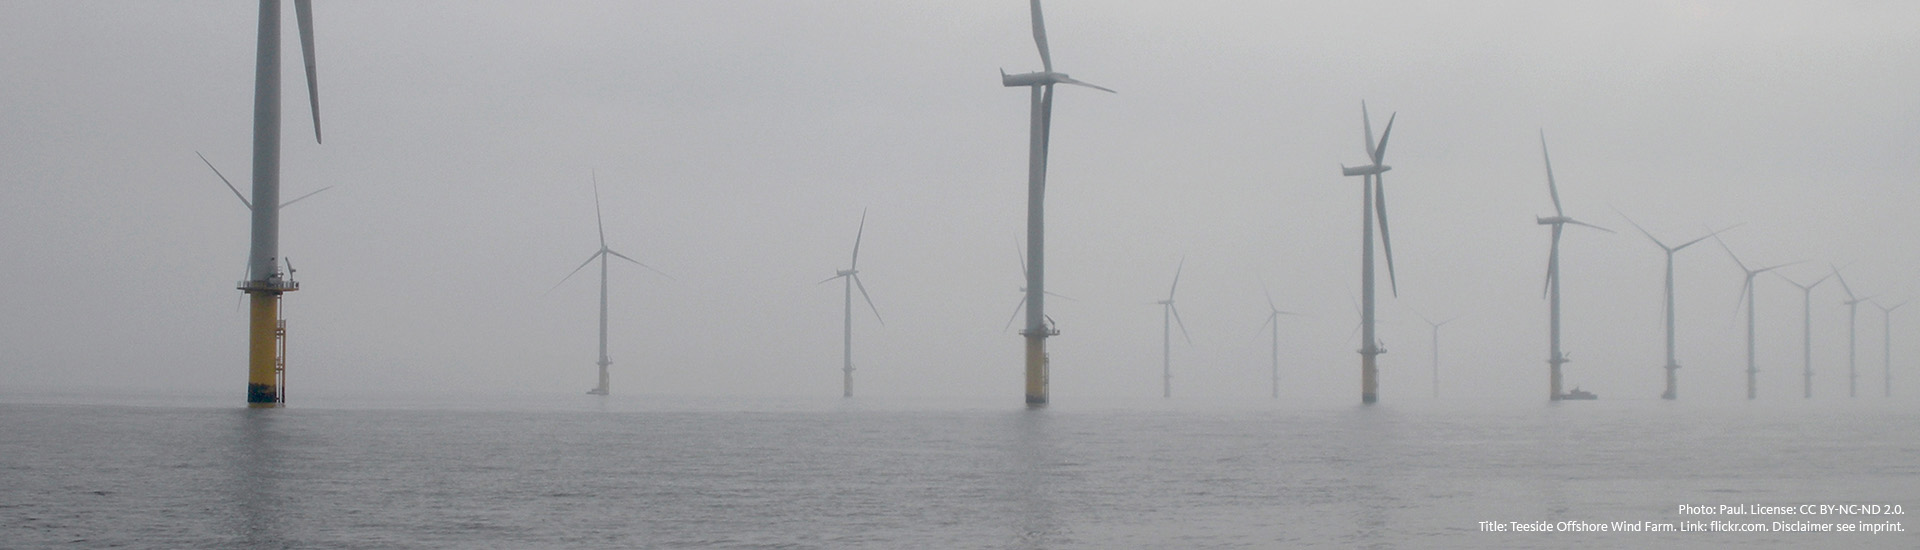 Photo: Paul. License: CC BY-NC-ND 2.0. Title: Teeside Offshore Wind Farm. Link: flickr.com. Disclaimer see imprint.